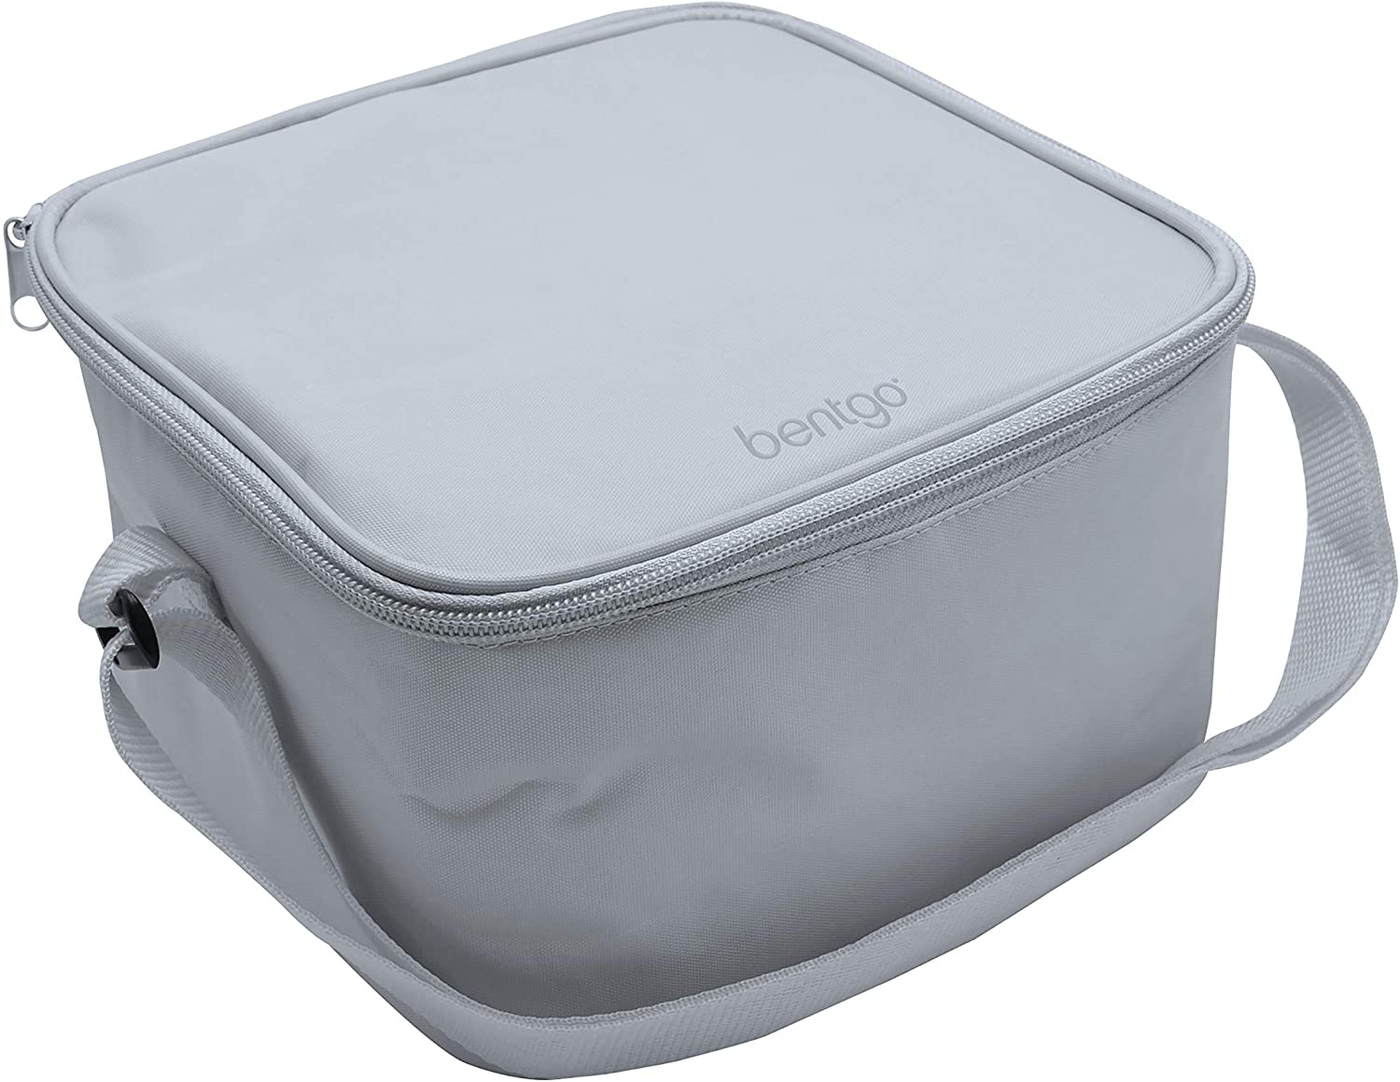 Bentgo Classic Bag (Gray) - Insulated Lunch Bag Keeps Food Cold On the Go - Fits the Bentgo Classic Lunch Box, Bentgo Cup, Bentgo Sauce Dippers and an Ice Pack - Works With Other Food Storage Boxes